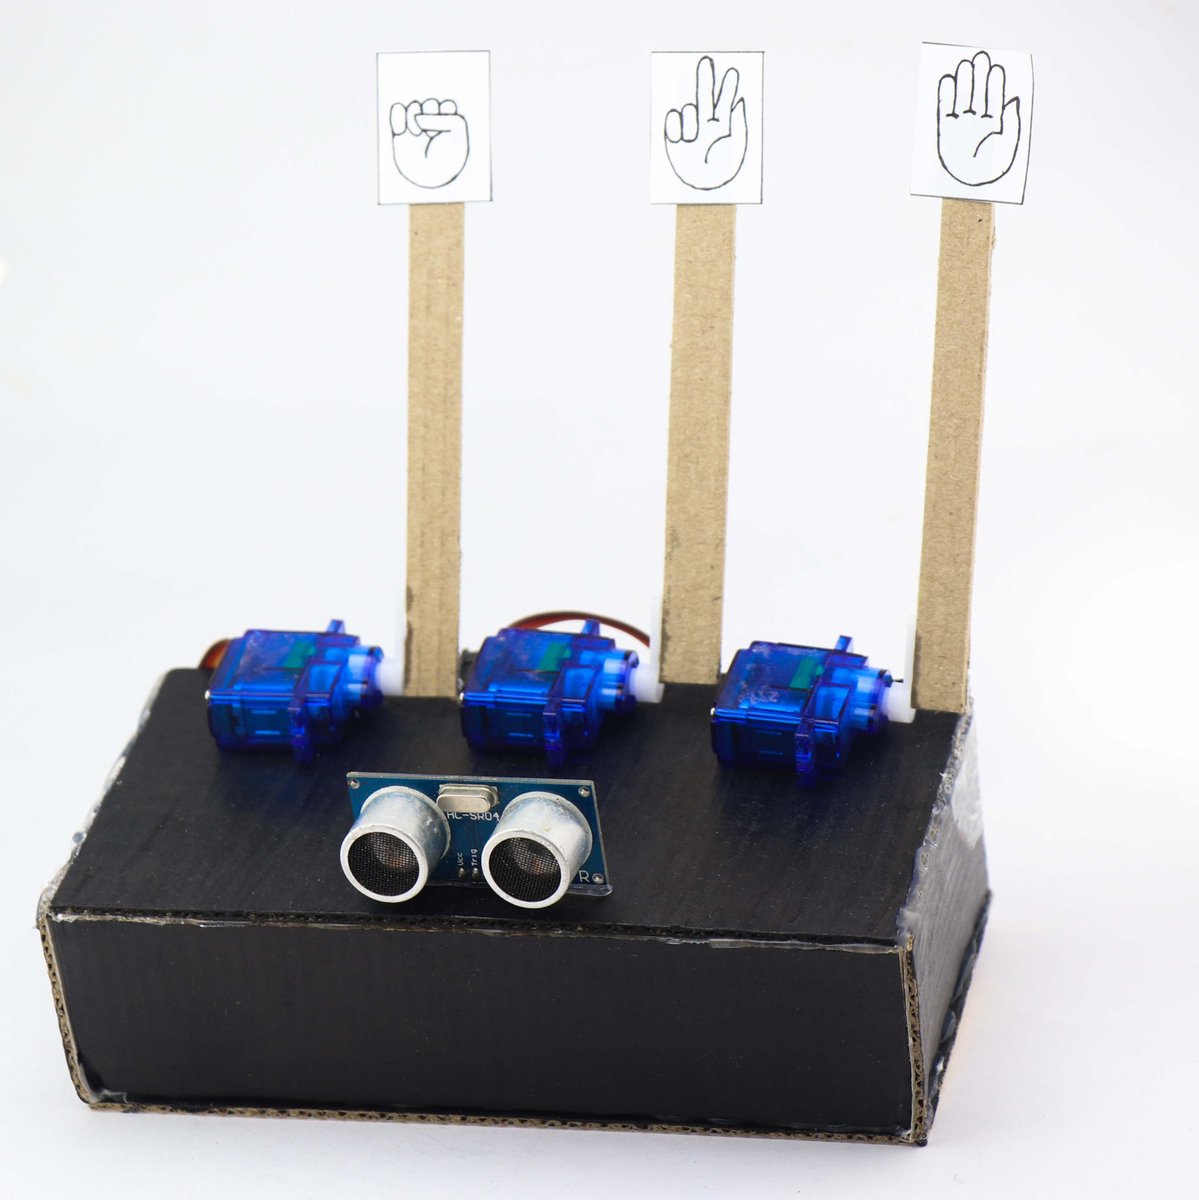 Make a rock paper scissors game using @tinkercad Circuits and Arduino with CrazyScience 🗿 📄 ✂️ 

instructables.com/Rock-Paper-Sci…

#MadeWithTinkercad #TinkercadCircuits #MakerED #MakeAnything